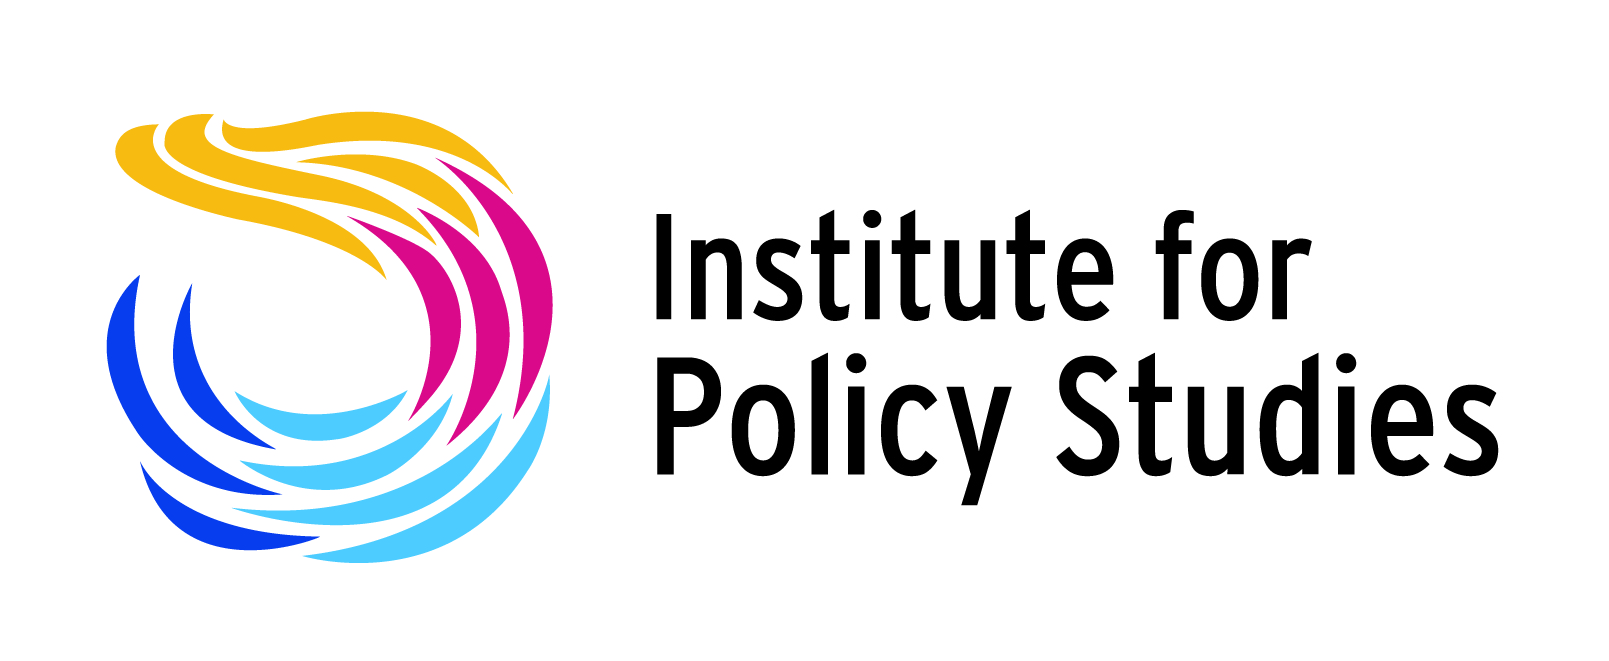 Institute for Policy Studies Logo. 